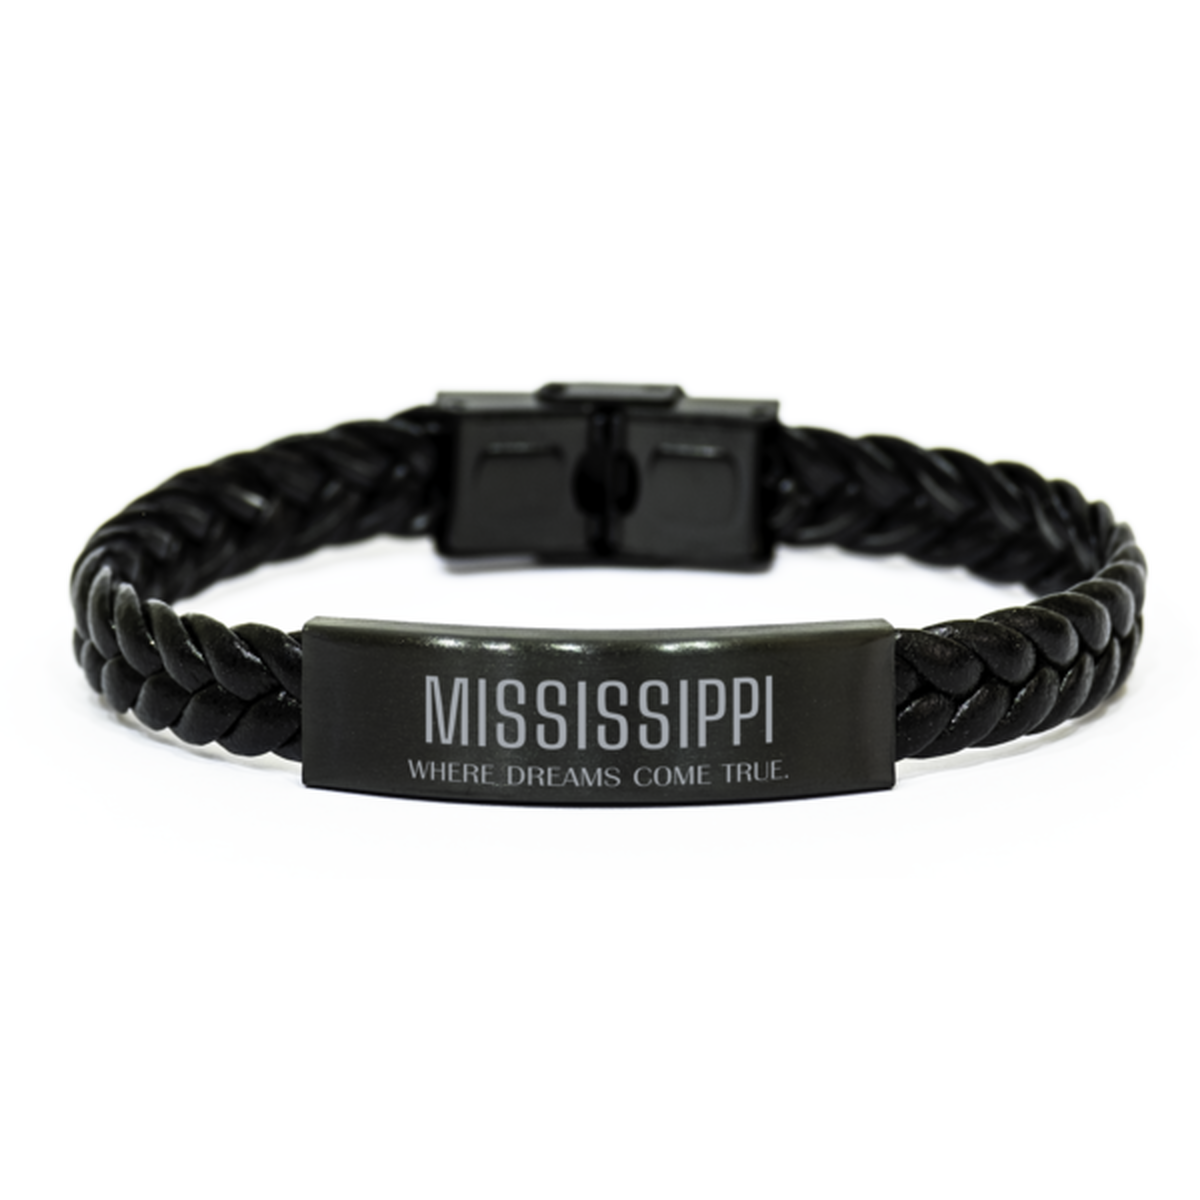 Love Mississippi State Braided Leather Bracelet, Mississippi Where dreams come true, Birthday Inspirational Gifts For Mississippi Men, Women, Friends